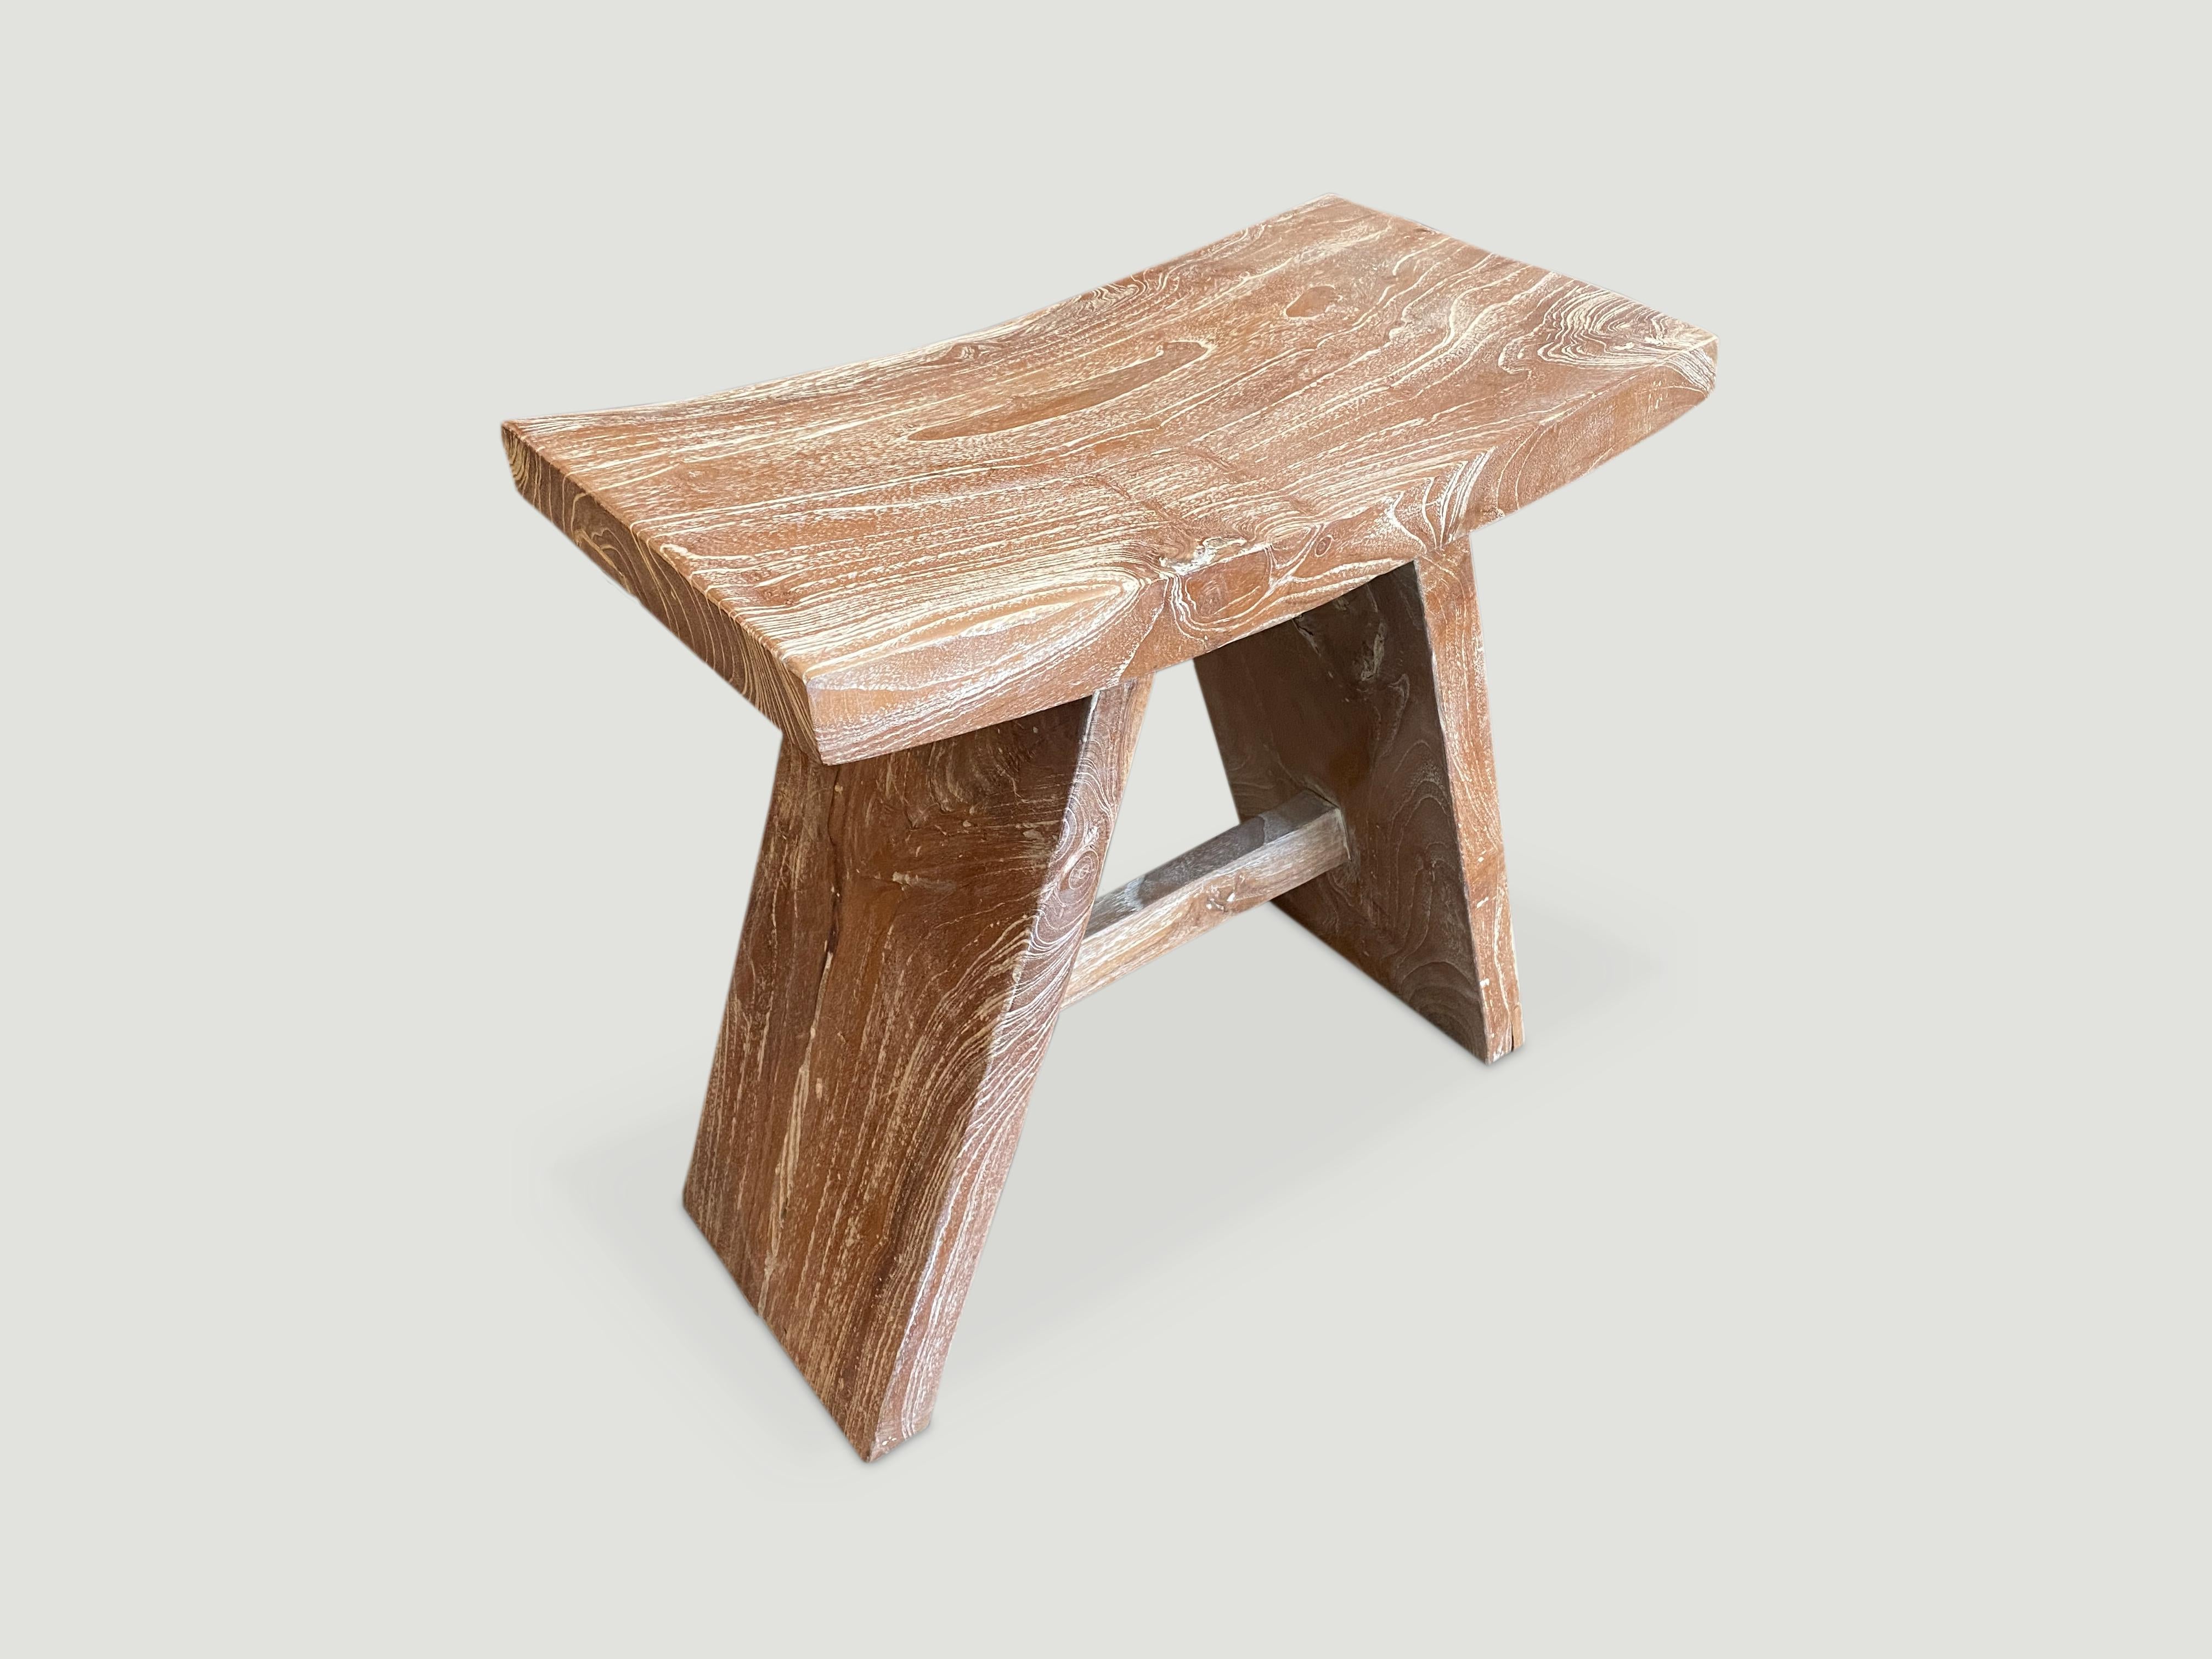 Teak ‘A’ Bench as seen in Architectural Digest. This reclaimed teak wood bench represents a modern, Minimalist aesthetic Perfect anywhere from a bathroom, kitchen or bedroom with the top section made from a single teak slab. We added a light cerused